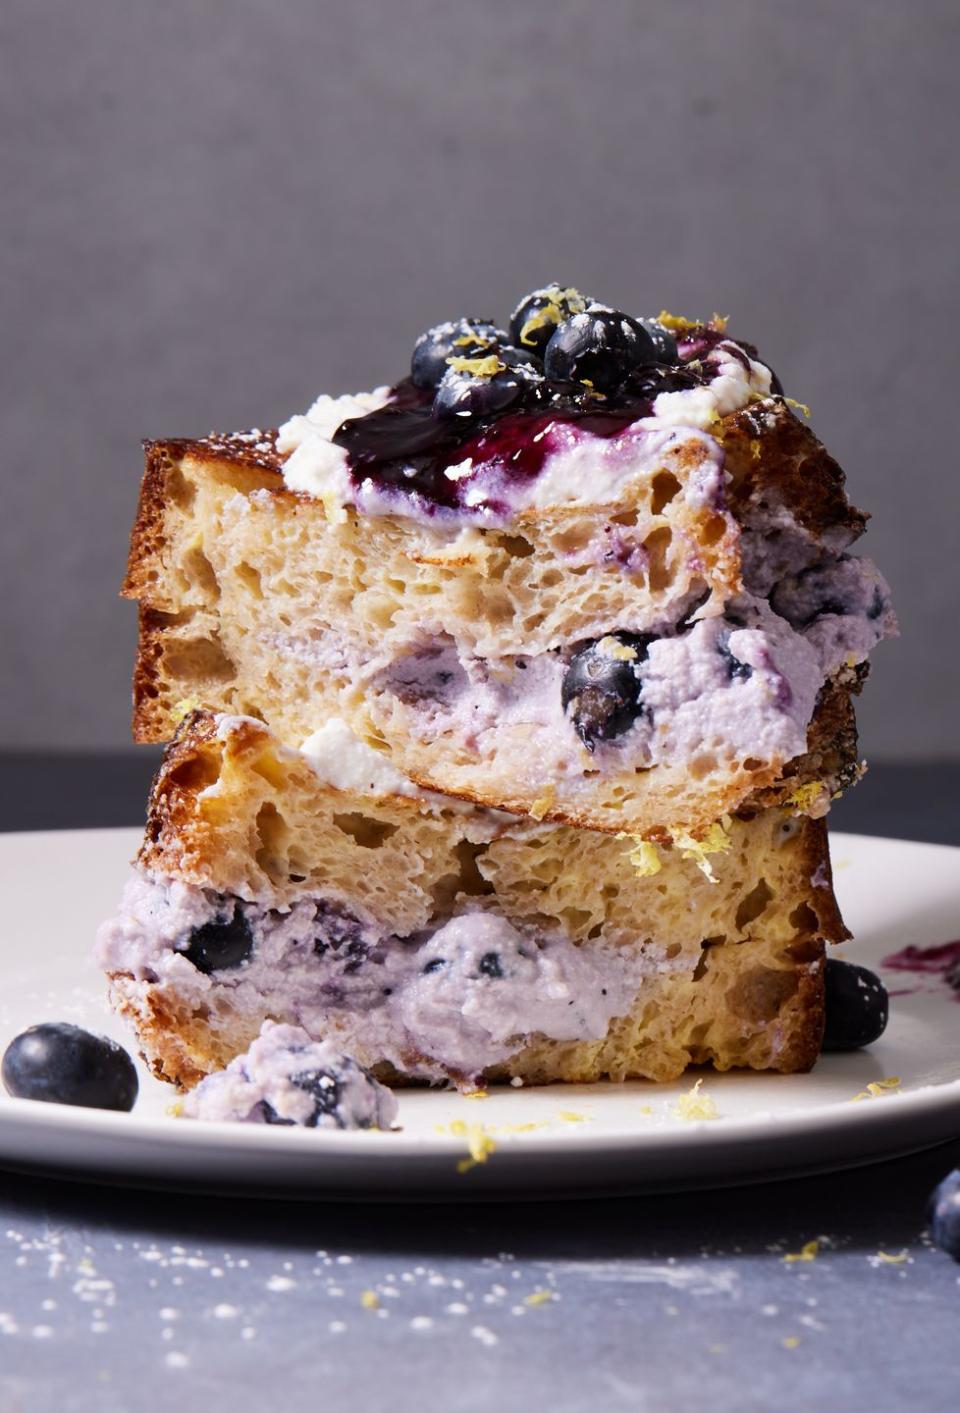 <p>Stuffed with a rich, lilac-colored blueberry <a href="https://www.delish.com/cooking/recipe-ideas/a32937529/homemade-ricotta-recipe/" rel="nofollow noopener" target="_blank" data-ylk="slk:ricotta;elm:context_link;itc:0;sec:content-canvas" class="link ">ricotta</a>, this <a href="https://www.delish.com/cooking/recipe-ideas/g2973/50-most-delish-french-toasts/" rel="nofollow noopener" target="_blank" data-ylk="slk:French toast;elm:context_link;itc:0;sec:content-canvas" class="link ">French toast </a>exactly what we crave when we’re dreaming of a sweet breakfast to go with our morning coffee. Sourdough is our bread of choice because it’s sturdy, and its earthy tang is a nice foil to the rich filling. That said, if you love <a href="https://www.delish.com/cooking/recipe-ideas/a28848483/brioche-bread-recipe/" rel="nofollow noopener" target="_blank" data-ylk="slk:brioche;elm:context_link;itc:0;sec:content-canvas" class="link ">brioche</a> or <a href="https://www.delish.com/cooking/recipe-ideas/a32502247/challah-bread-recipe/" rel="nofollow noopener" target="_blank" data-ylk="slk:challah;elm:context_link;itc:0;sec:content-canvas" class="link ">challah</a> French toast, feel free to experiment with those instead.<br><br>Get the <strong><a href="https://www.delish.com/cooking/recipe-ideas/a39863465/blueberry-lemon-ricotta-stuffed-french-toast-recipe/" rel="nofollow noopener" target="_blank" data-ylk="slk:Blueberry-Lemon Ricotta Stuffed French Toast recipe;elm:context_link;itc:0;sec:content-canvas" class="link ">Blueberry-Lemon Ricotta Stuffed French Toast recipe</a></strong>.</p>